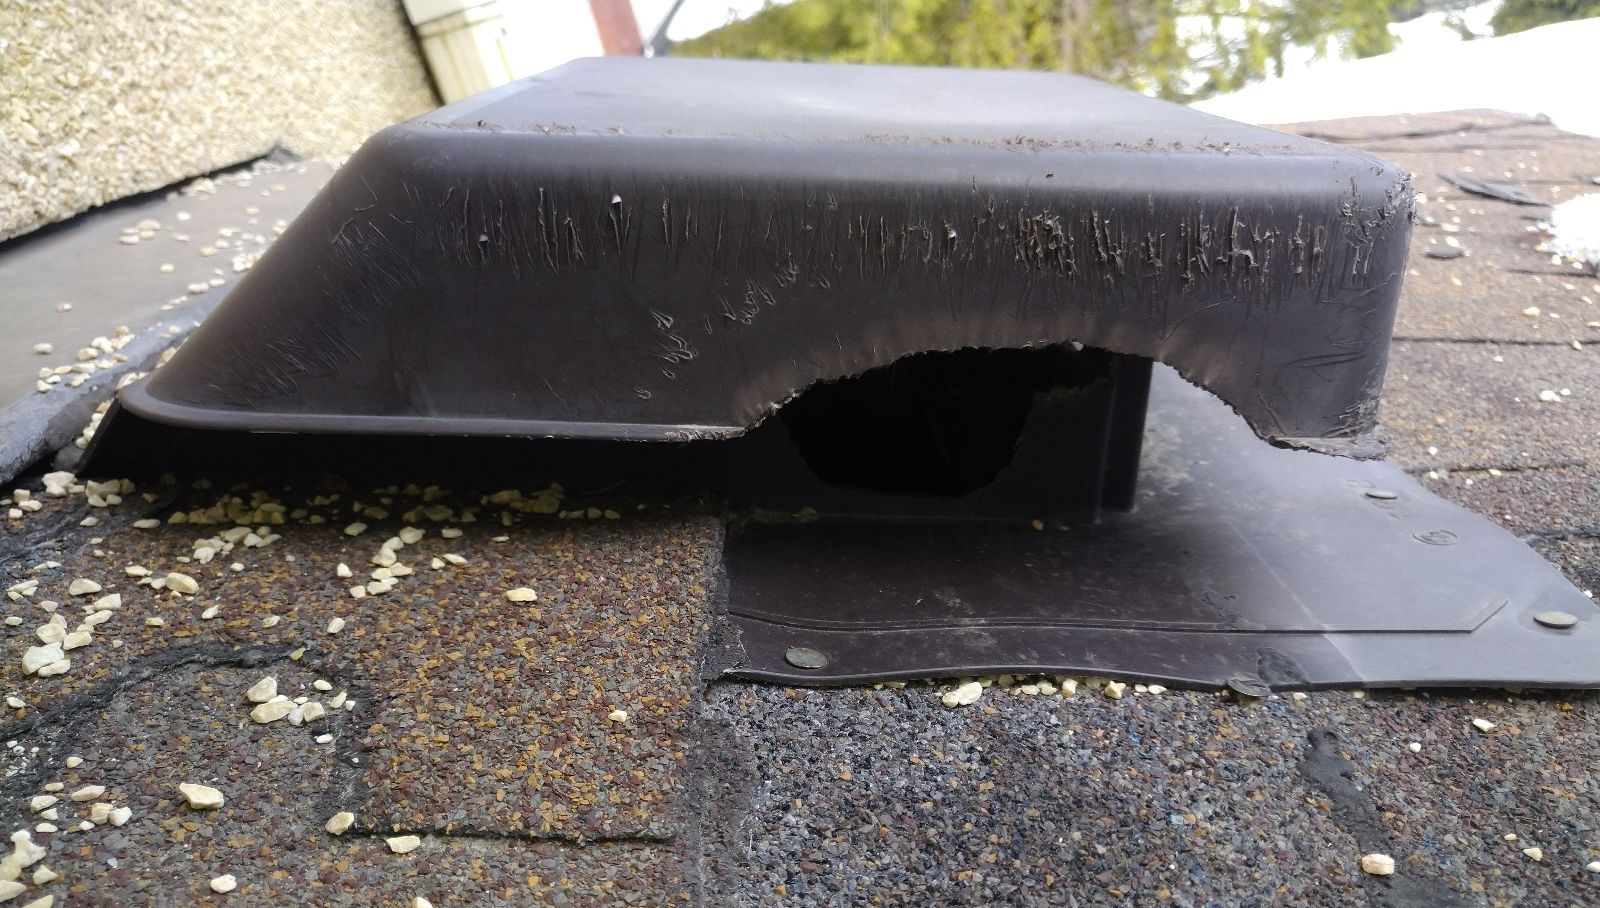 Ottawa roof vent squirrel entry damage chewing attic March 2023 3